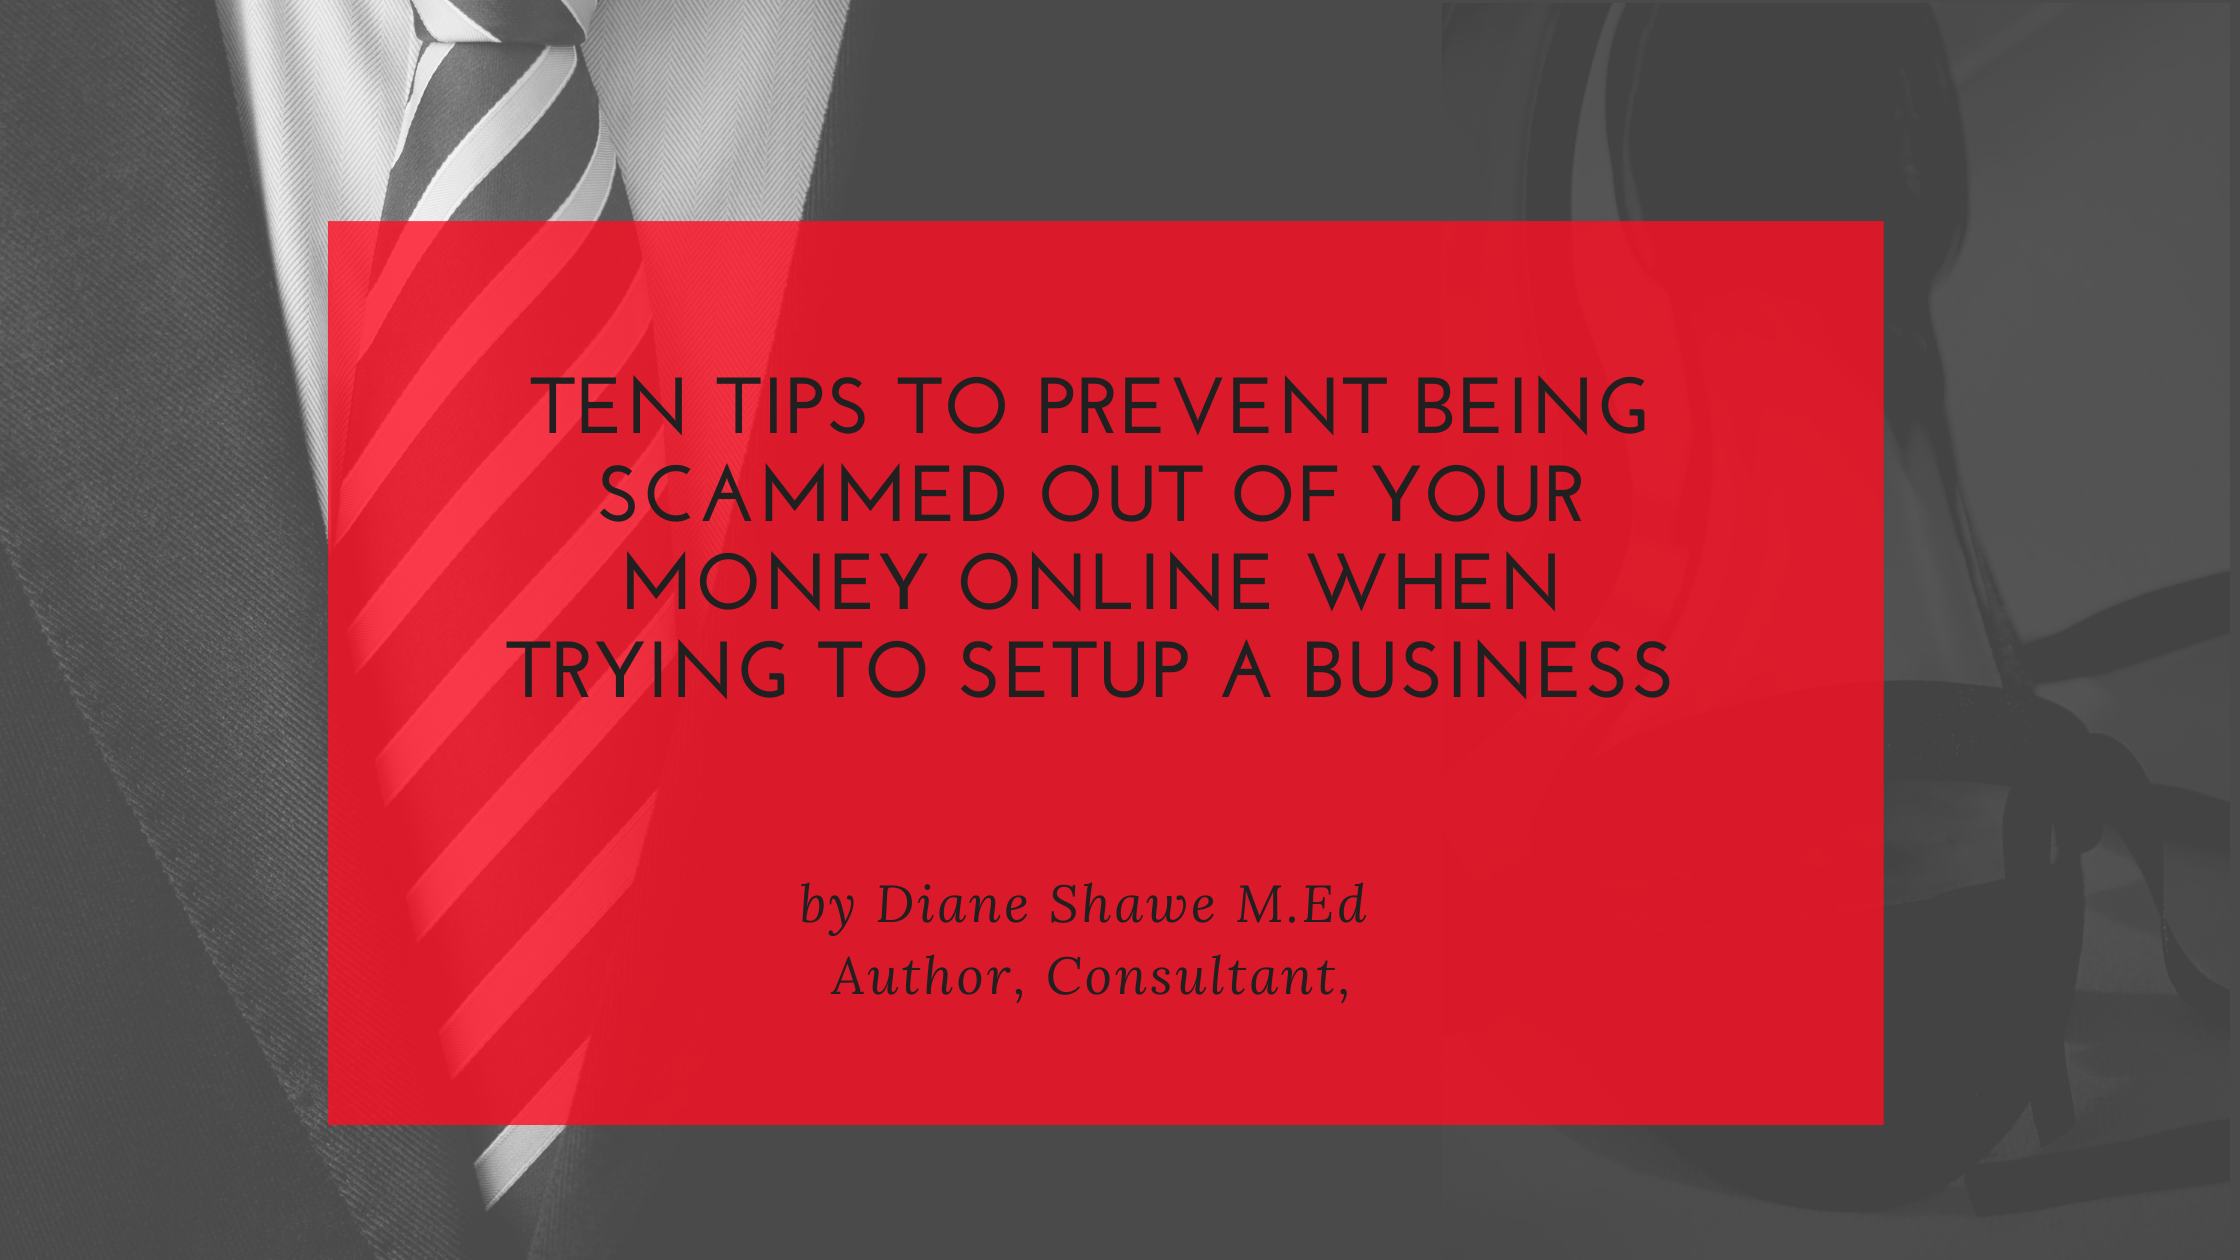 How to Avoid Business Startup Scams by Diane Shawe